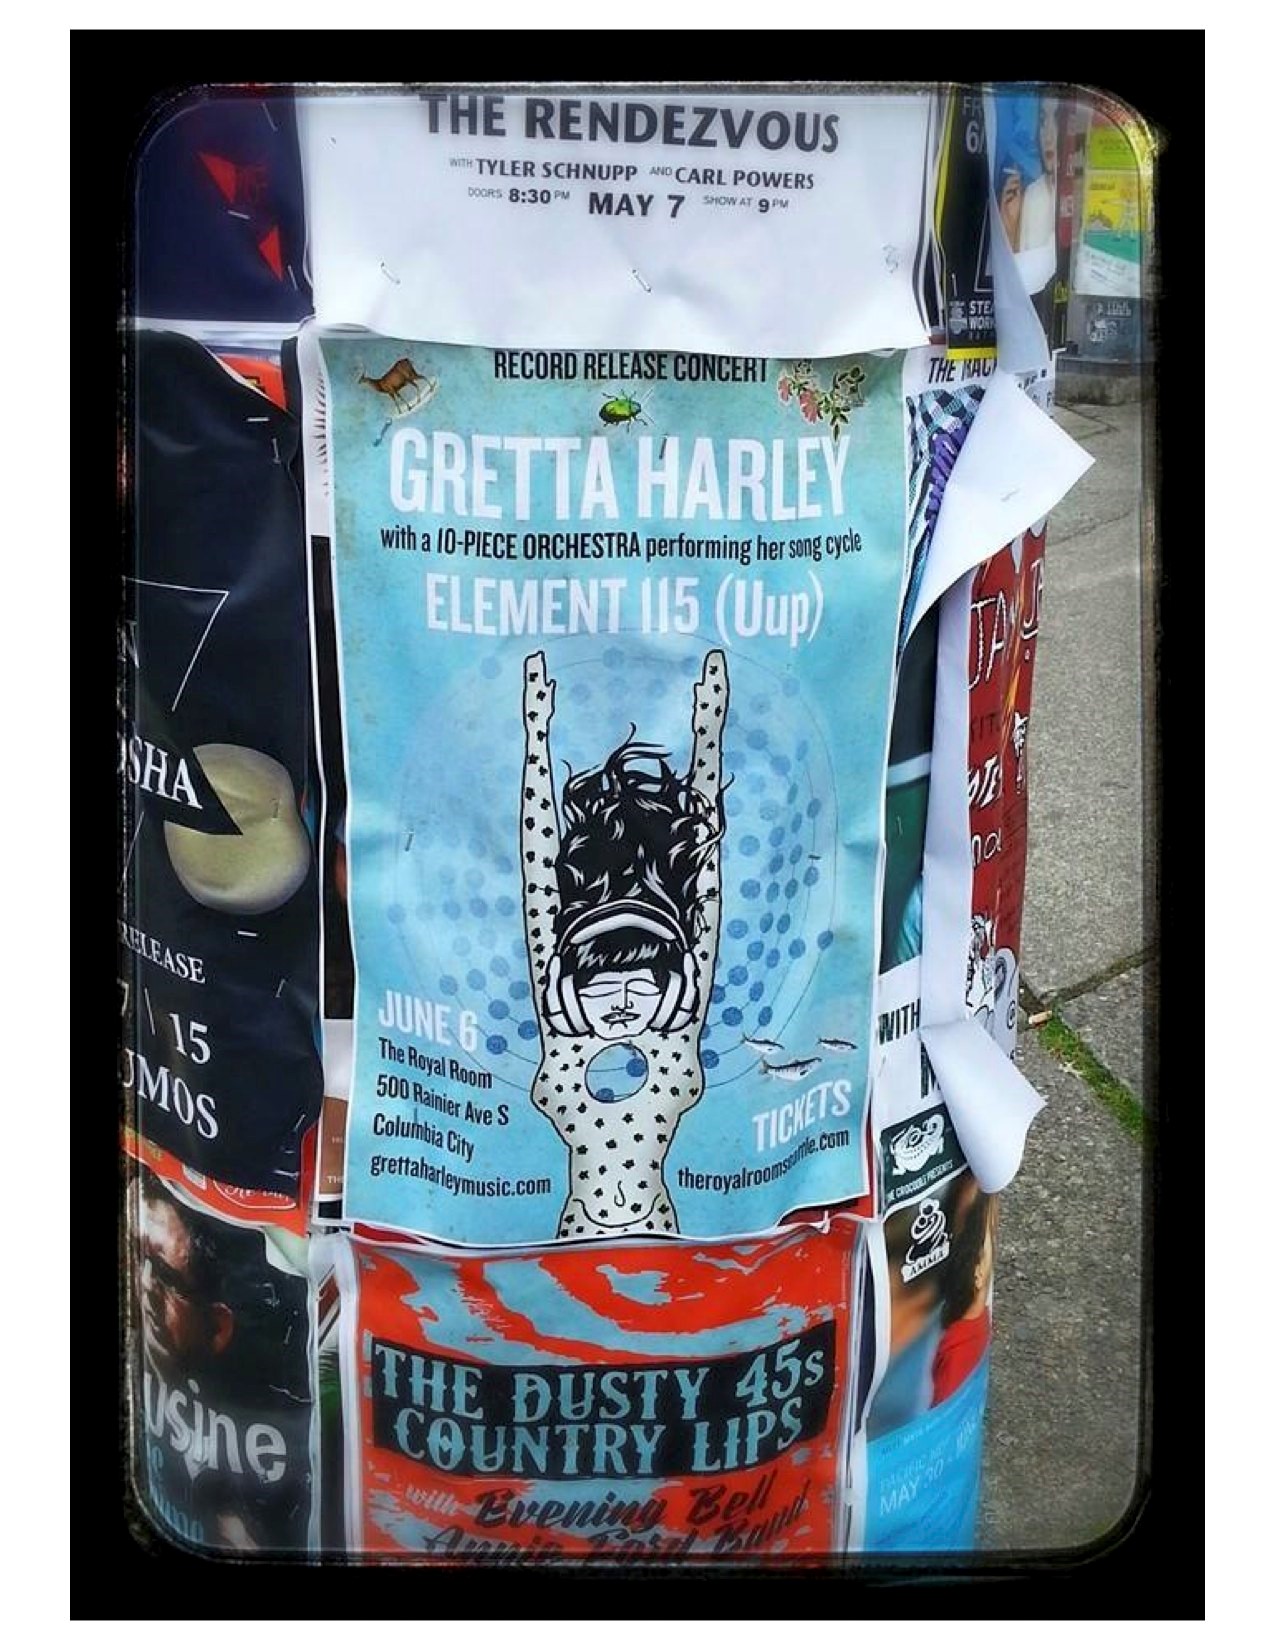 A concert poster for the 10-piece ensemble live concert of Gretta Harley's Elenet 115 on a pole with other concert posters.